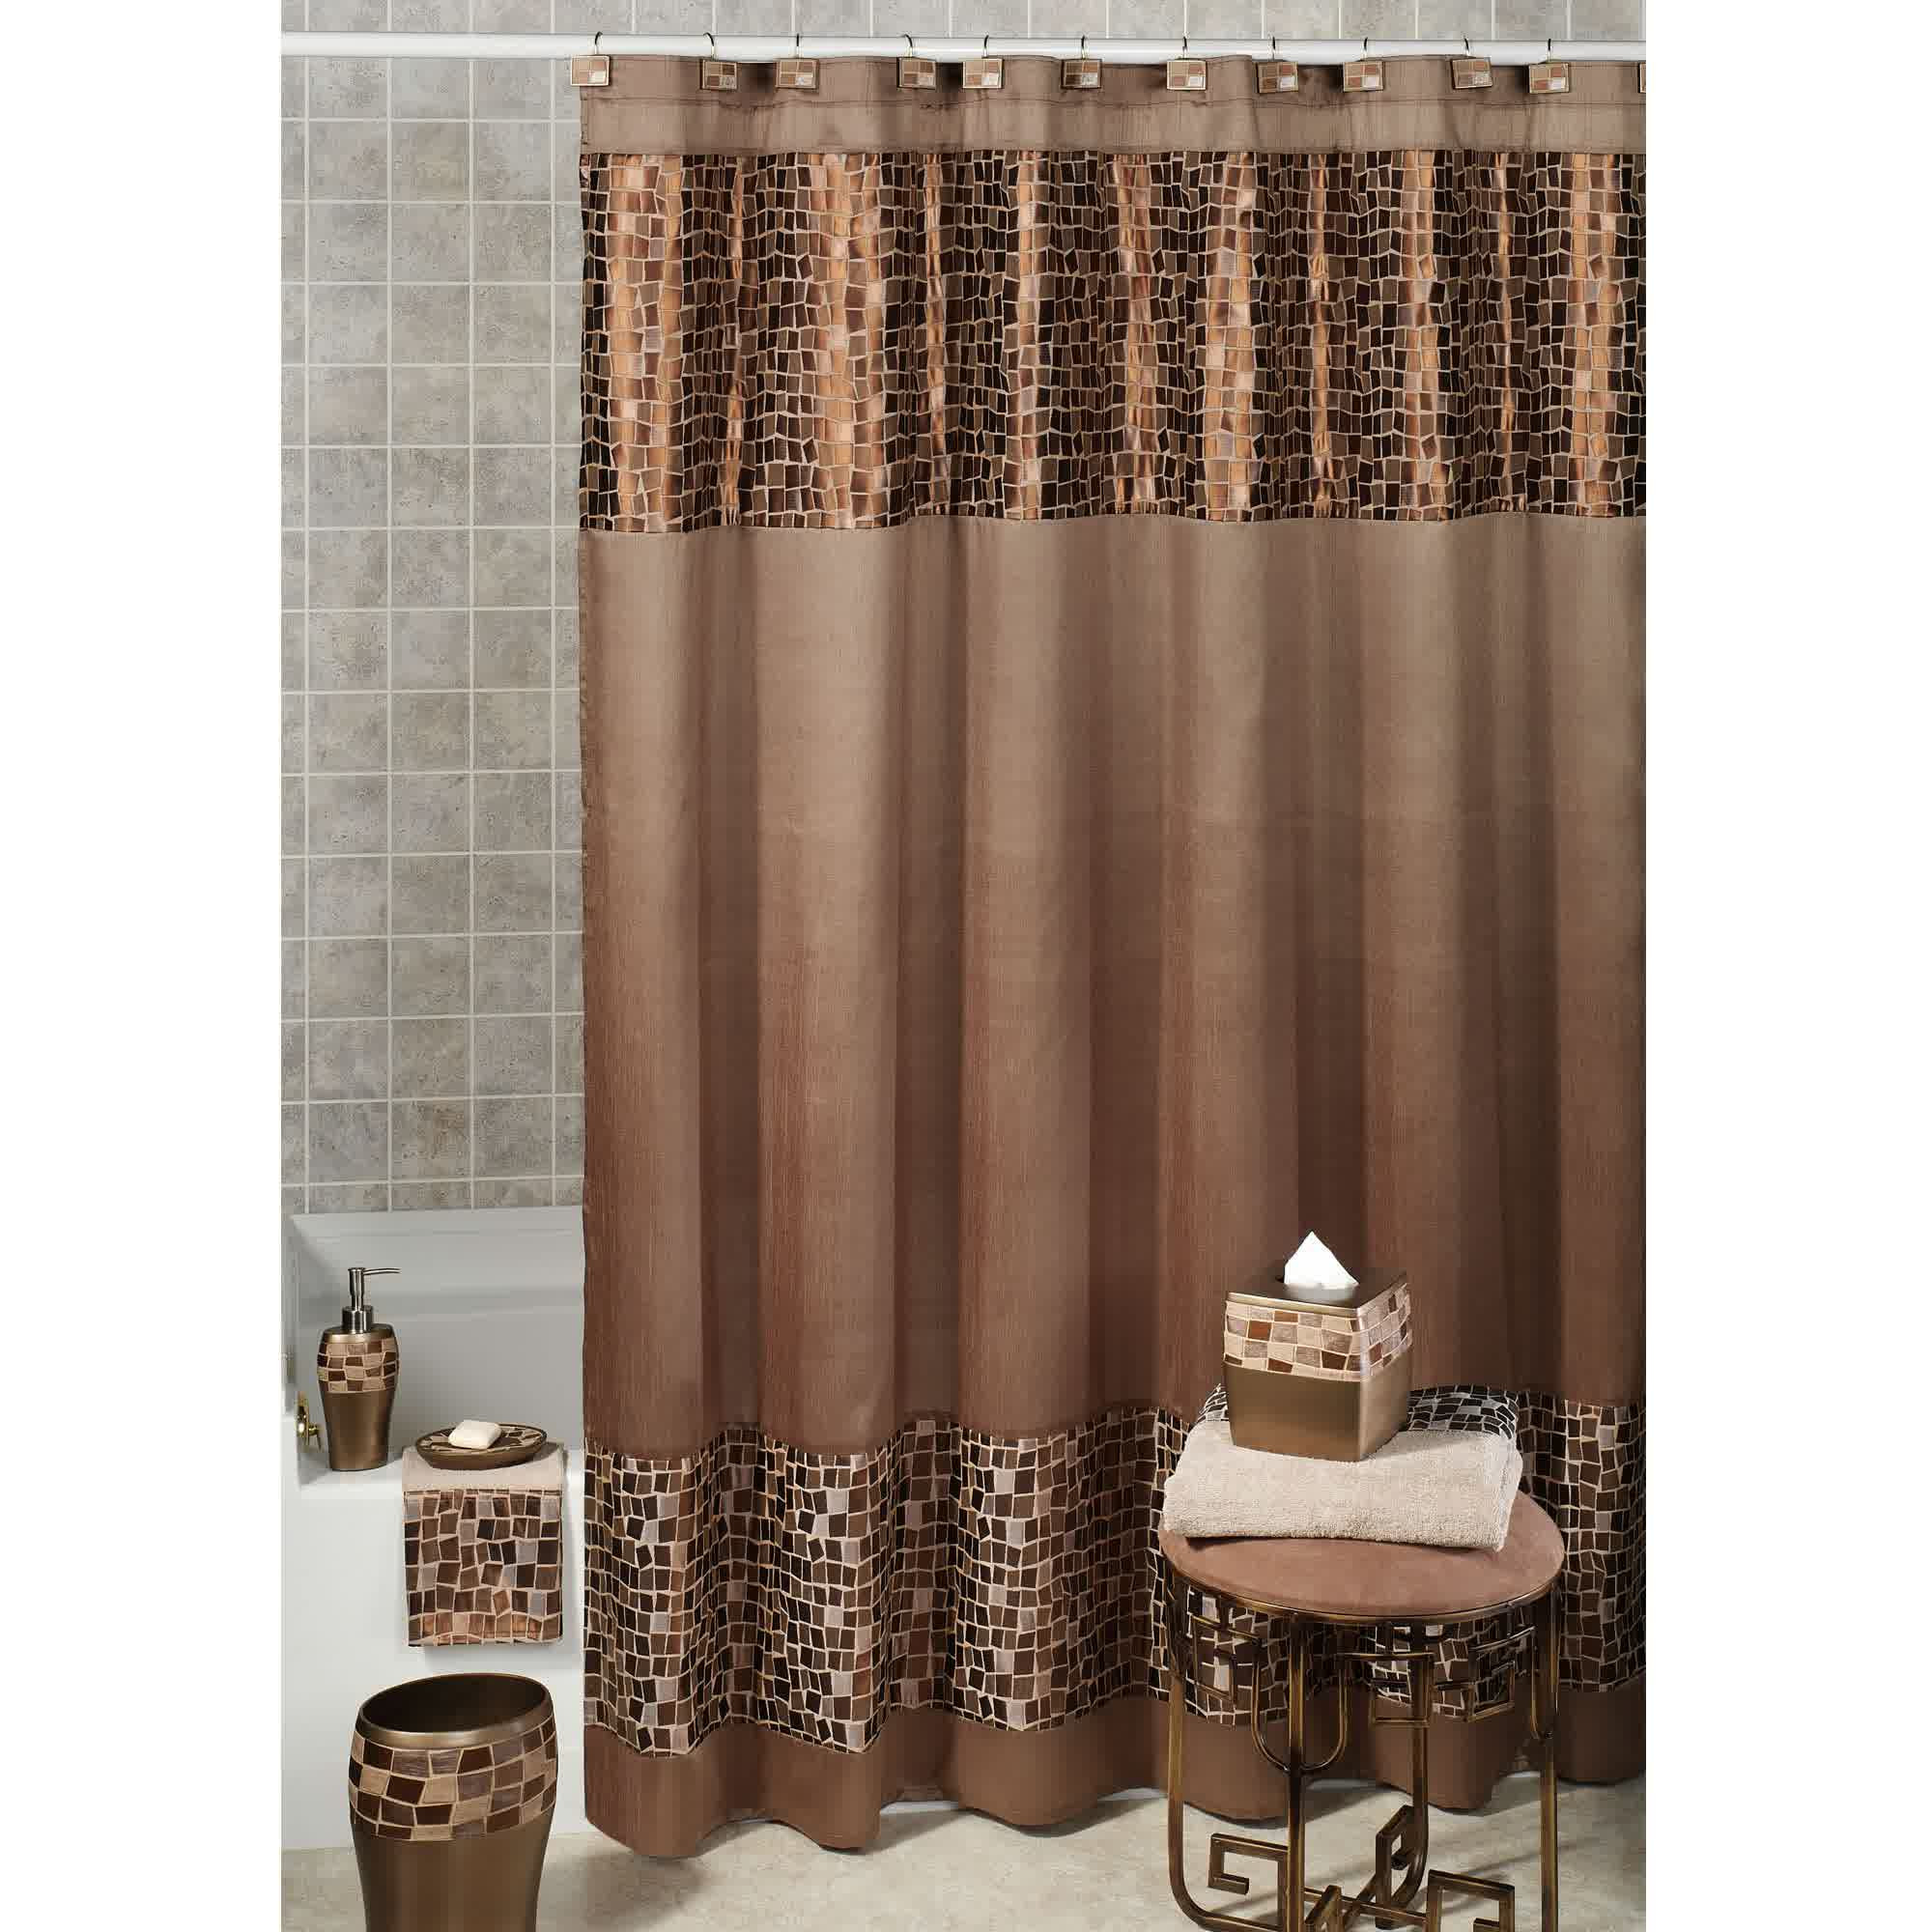 Brown Bathroom Shower Curtains
 Smart Tips of Using Cloth Shower Curtains